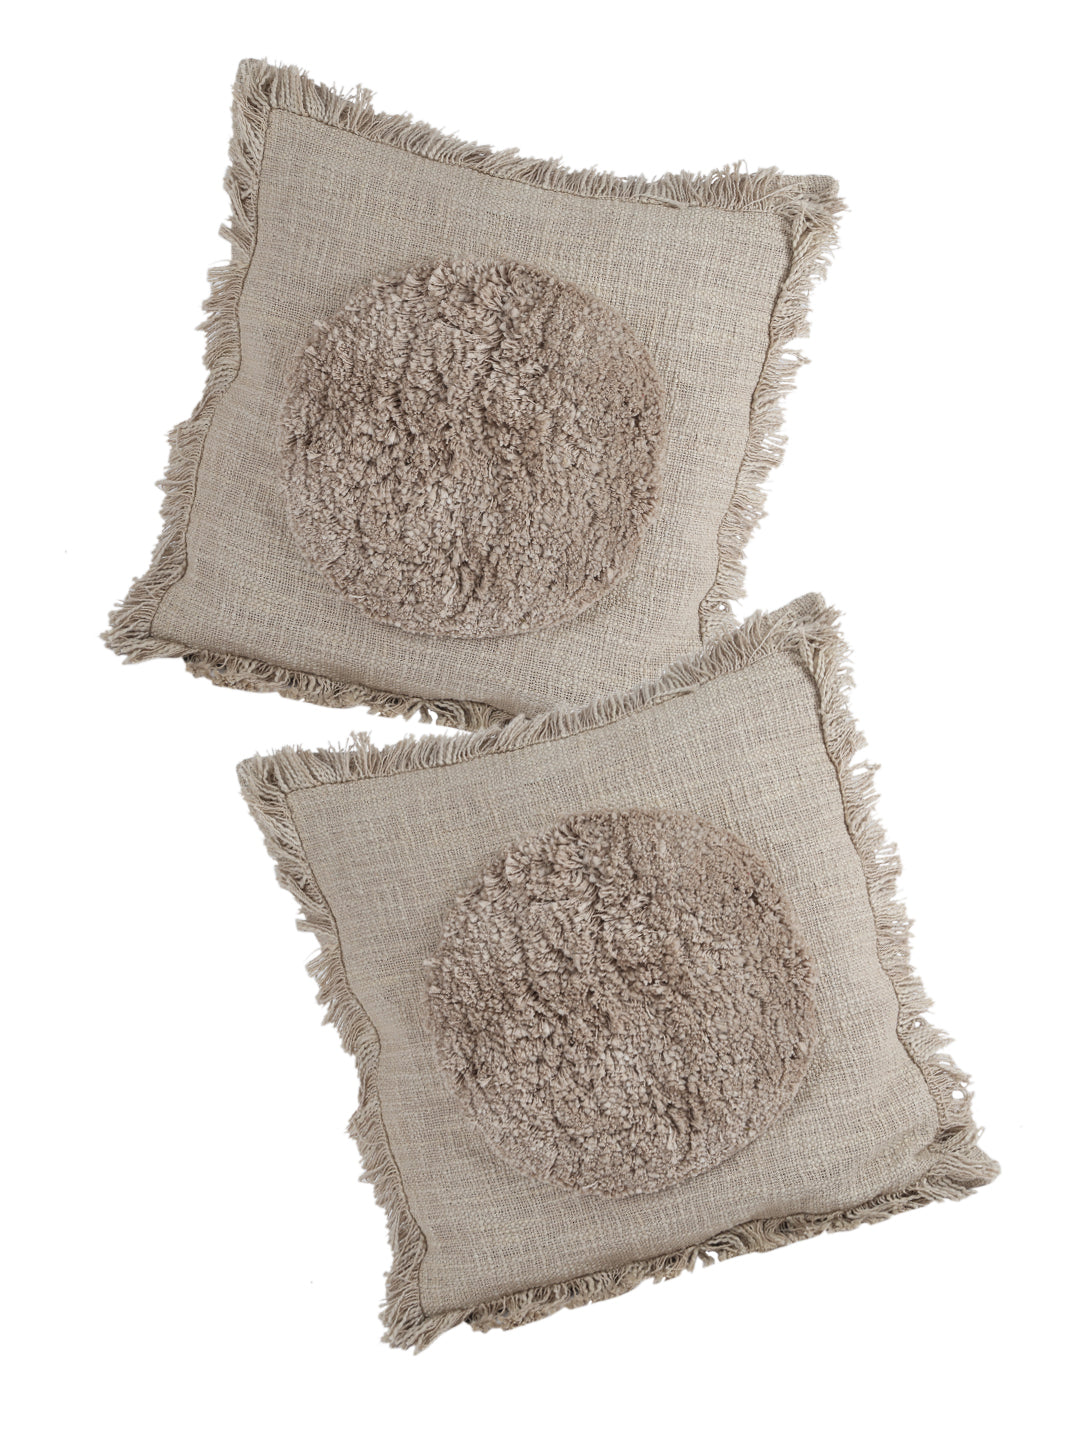 Camel Set of 2 Brown Embellished Square Cushion Covers